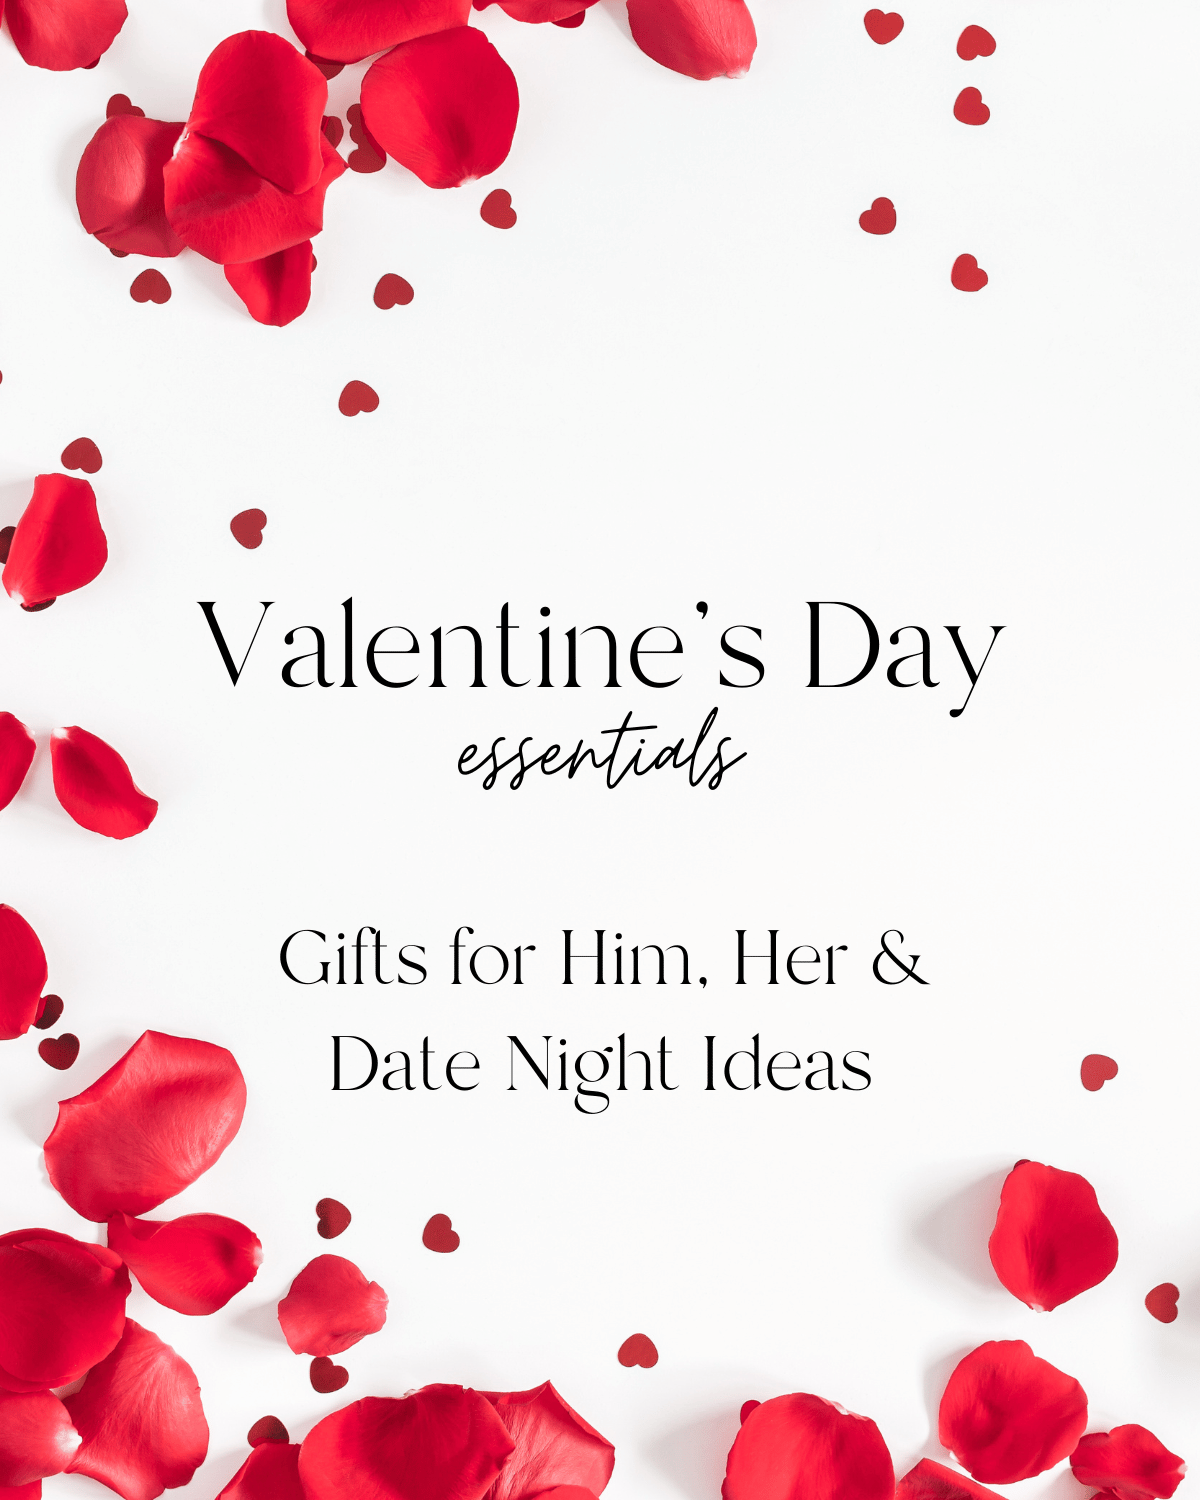 valentines day, valentines essentials, gifts for him, gifts for her, date night ideas, date night outfits, valentines day outfits